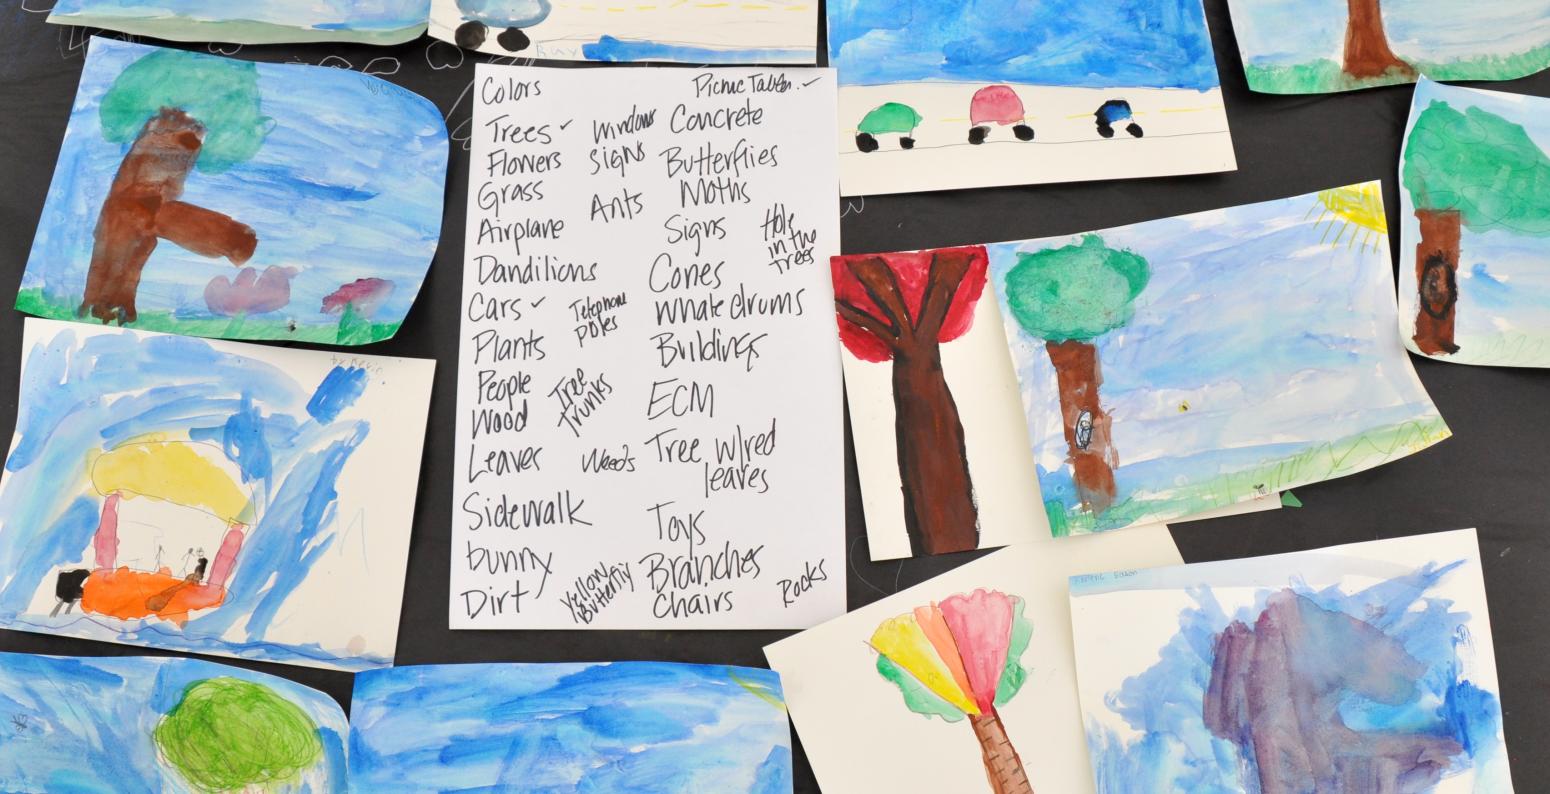 A collection of watercolor paintings of trees and nature, as well as a written list of things that were found outside.